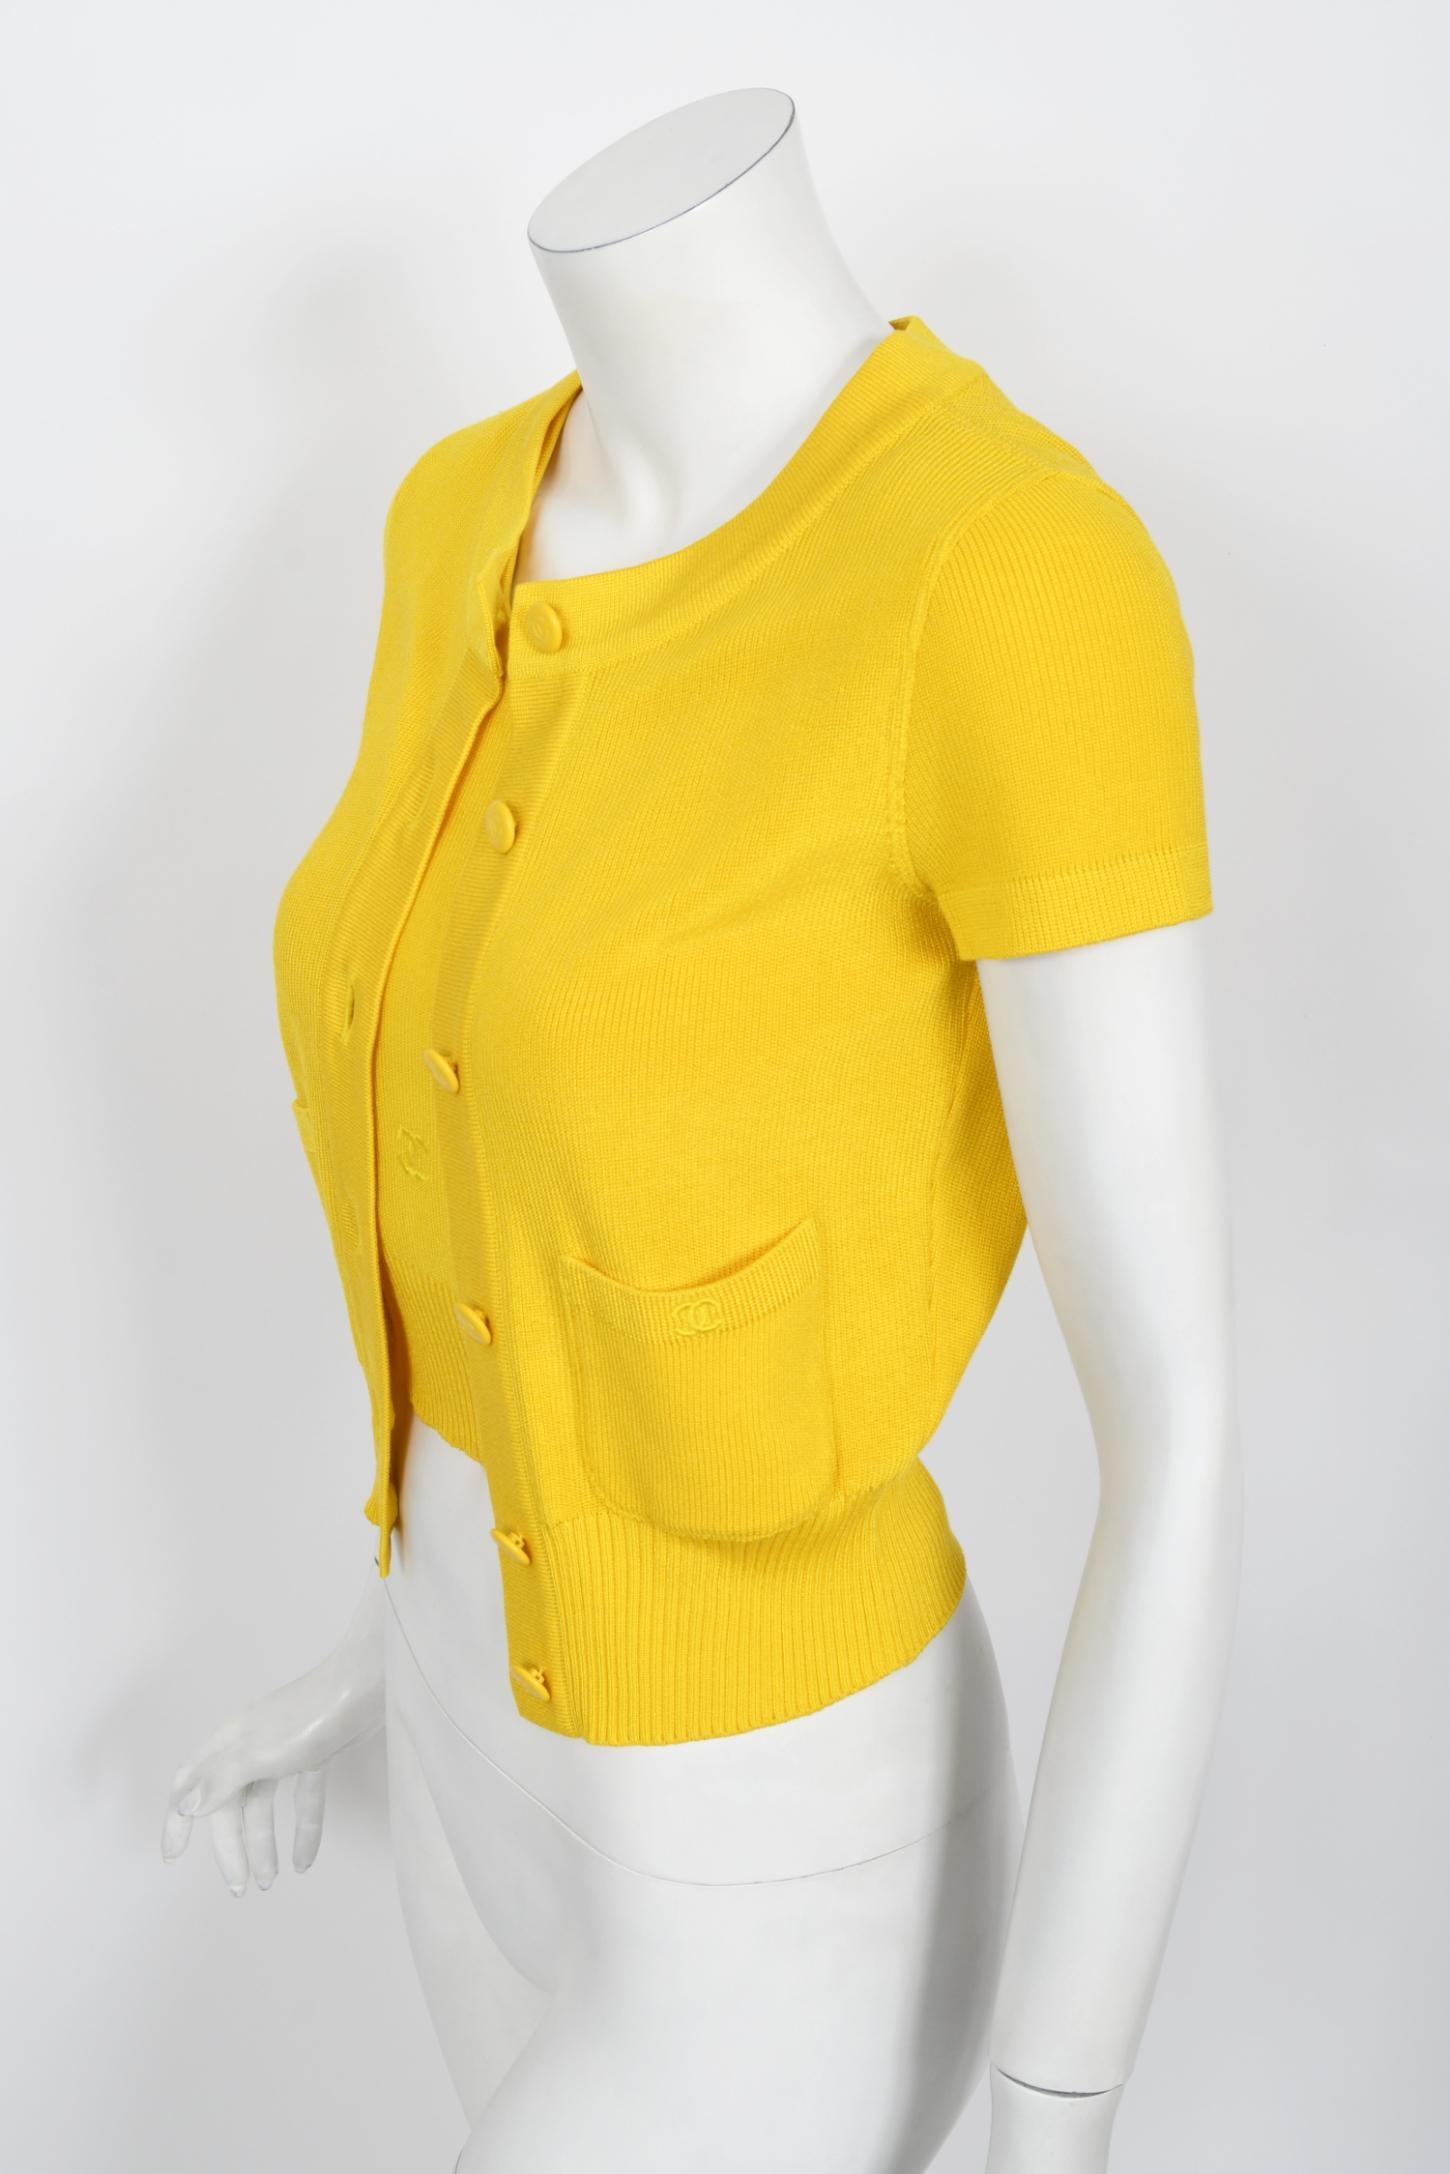 Vintage 1996 Chanel by Karl Lagerfeld Runway Yellow Knit Cropped Sweater Set  1